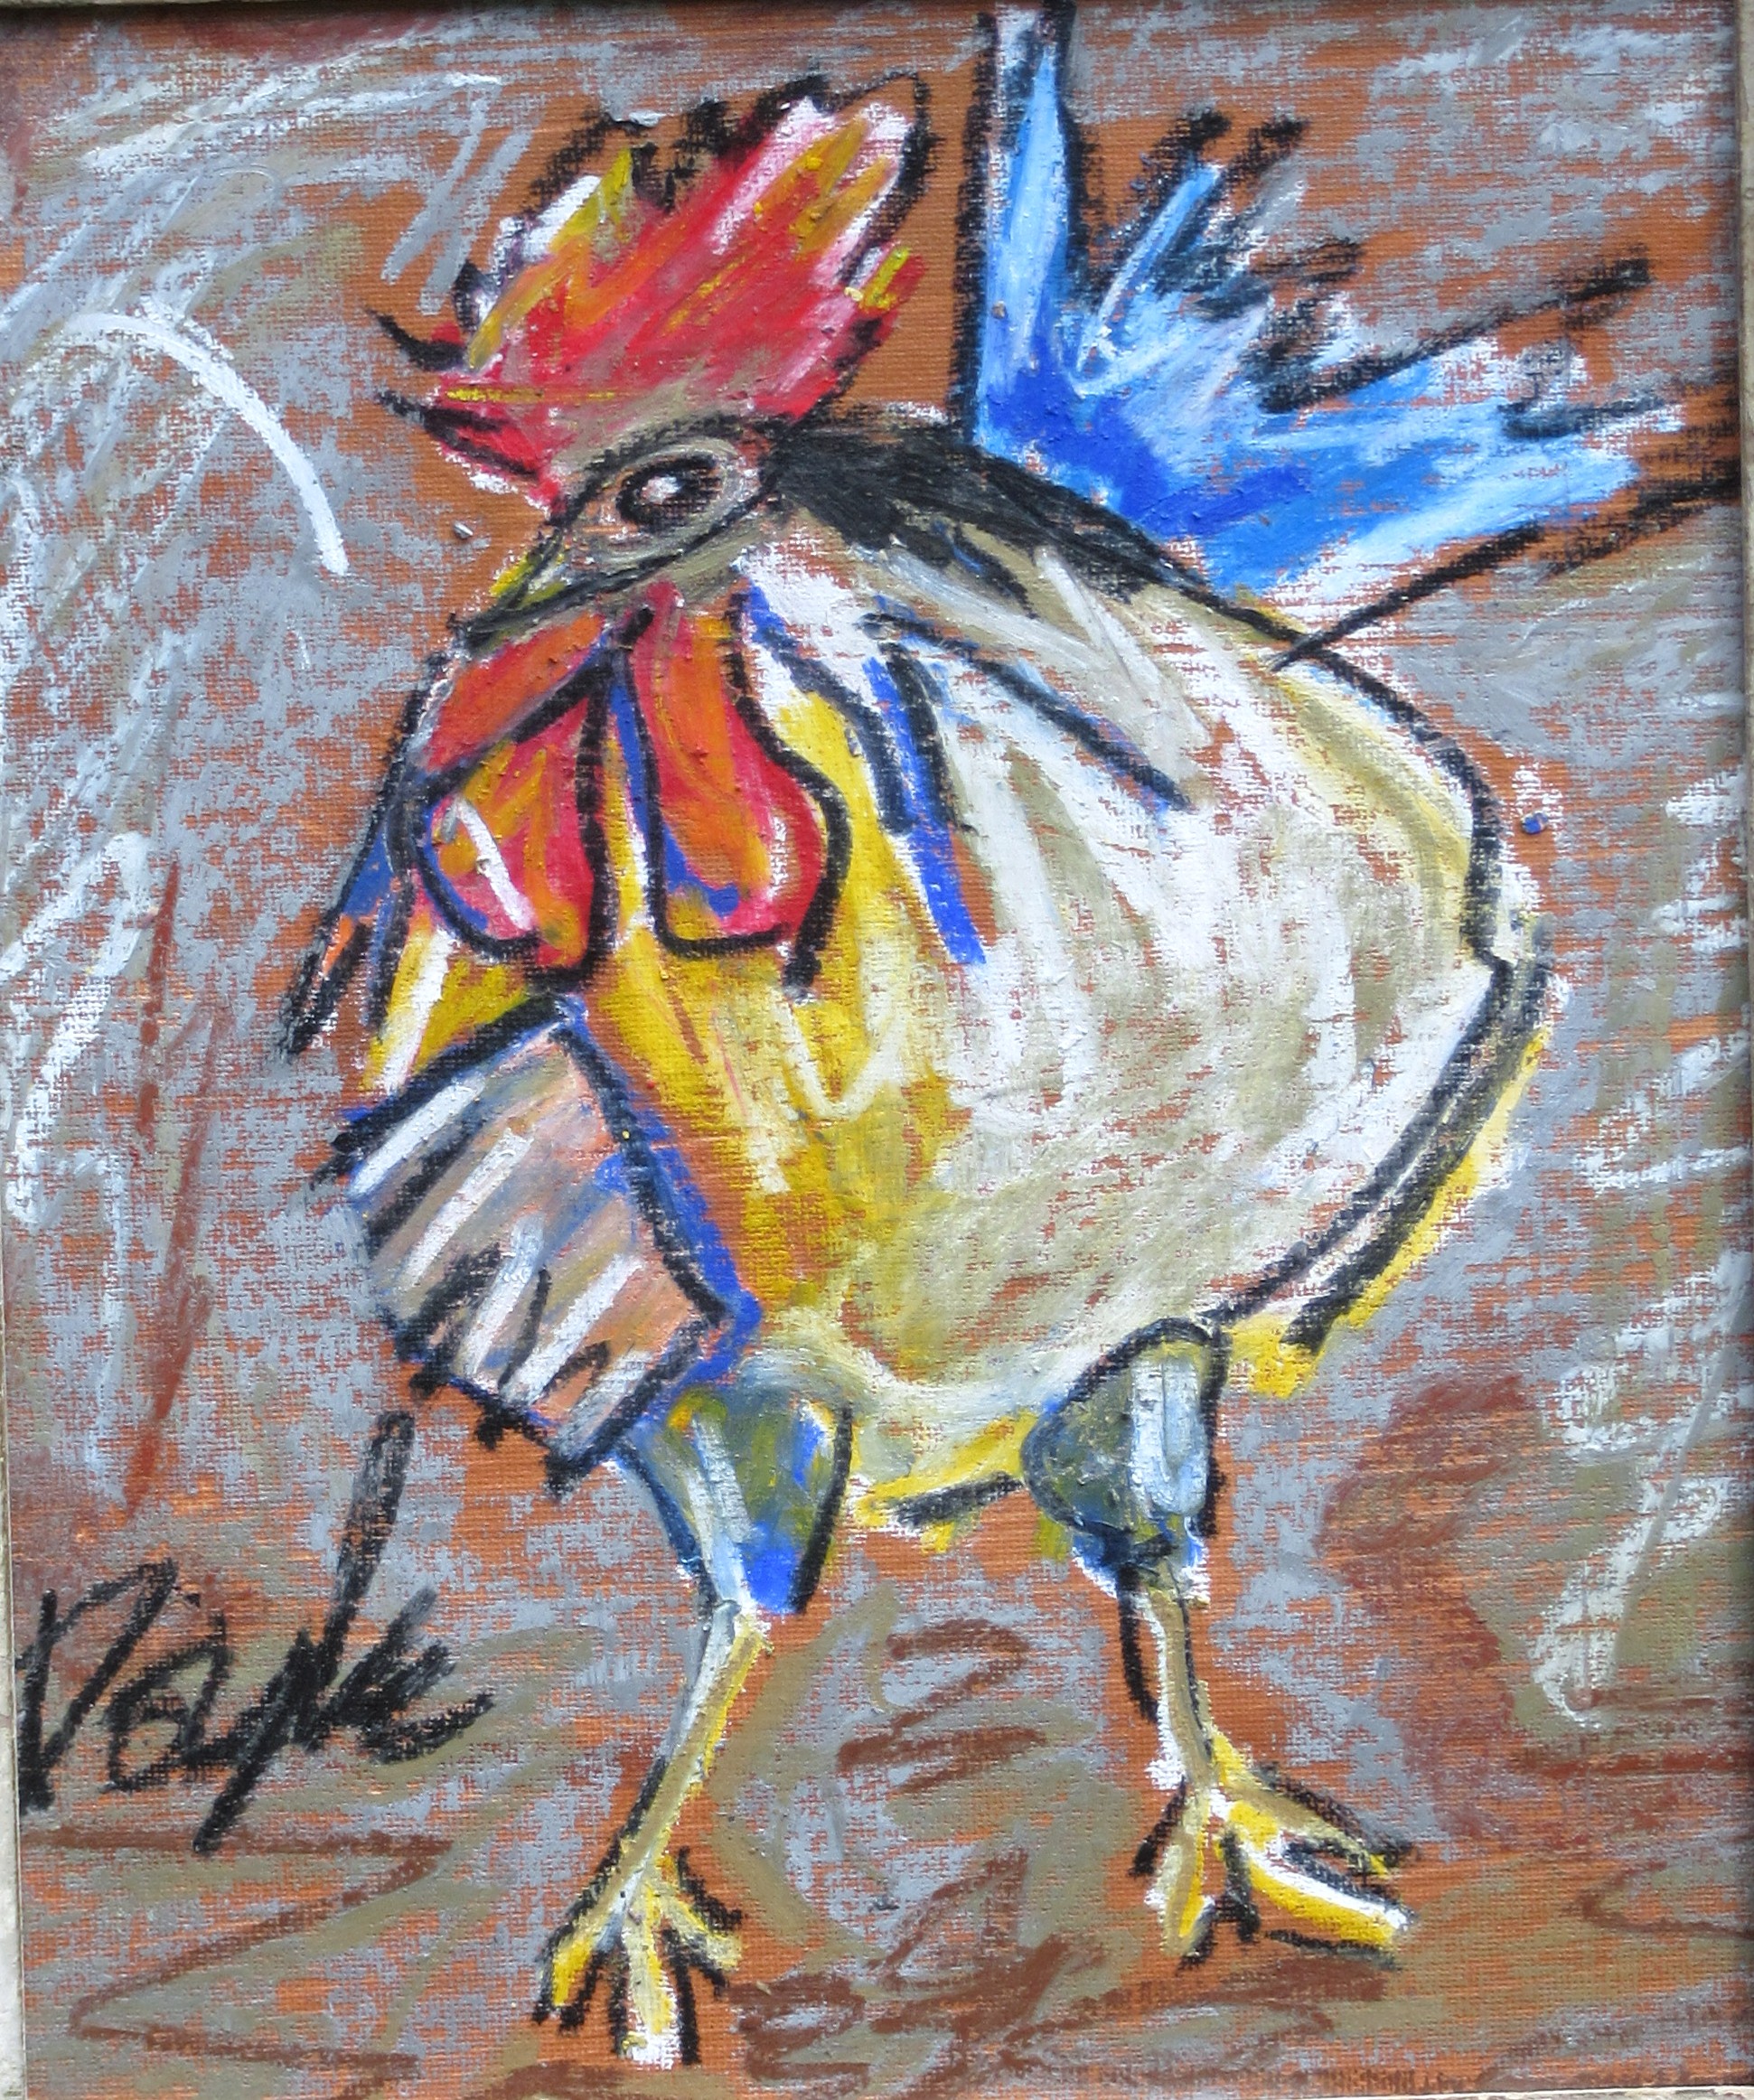 "The Cock"
12in x 10in
Oil Stick on Canvas